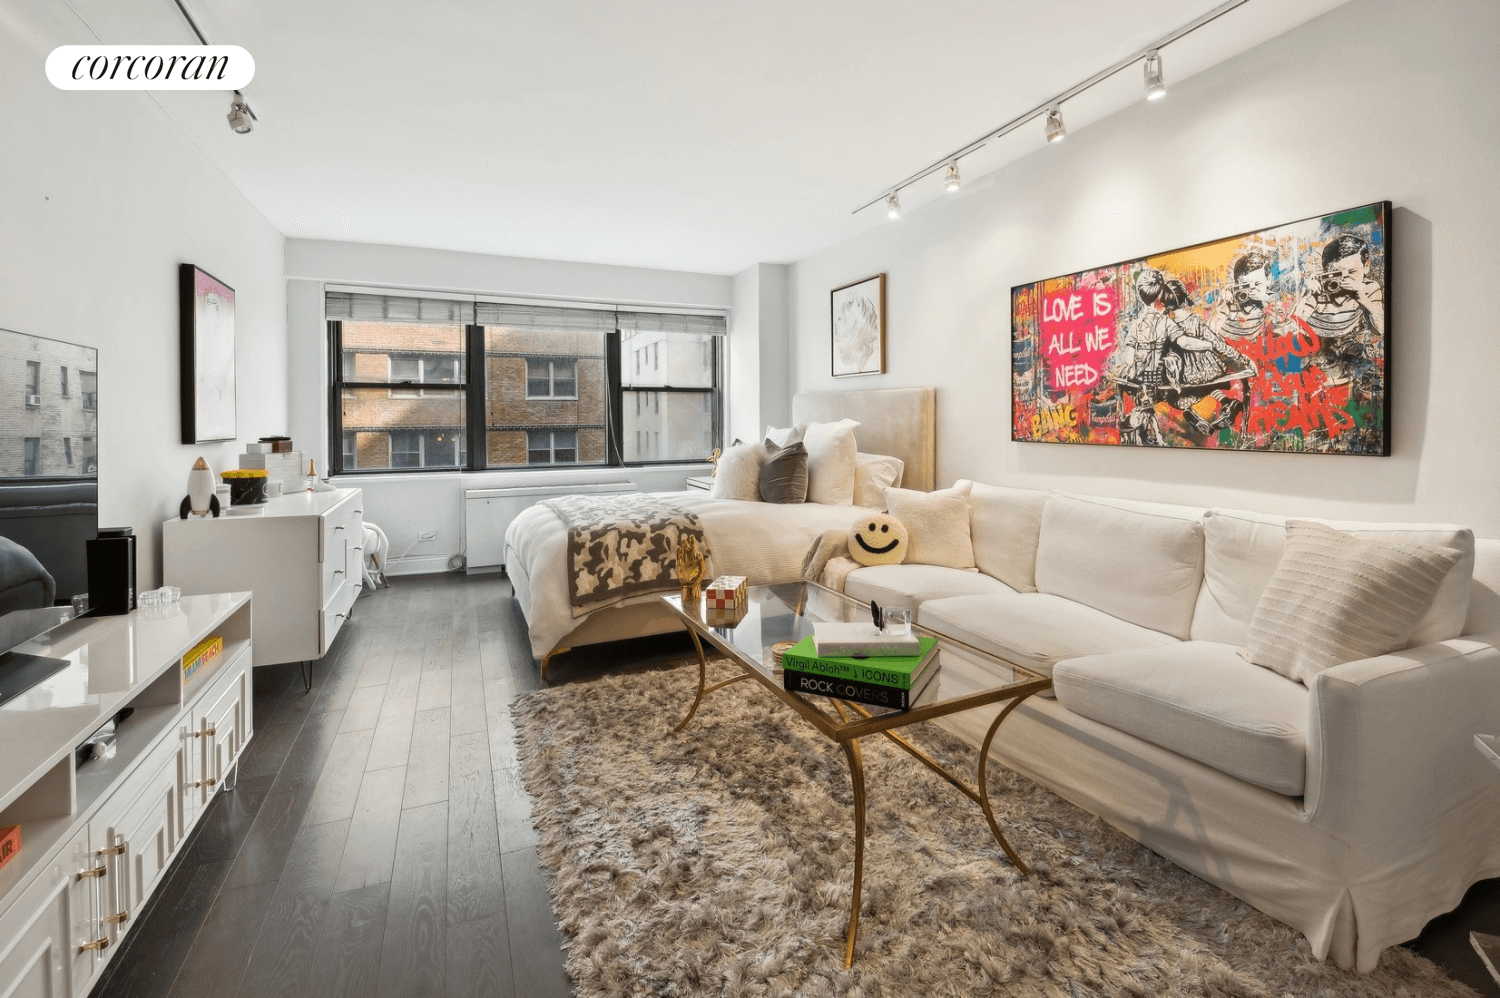 Welcome to your superb studio apartment at The Parker Gramercy, where abundant natural light, wide plank wood floors, and an inviting open floor plan await.